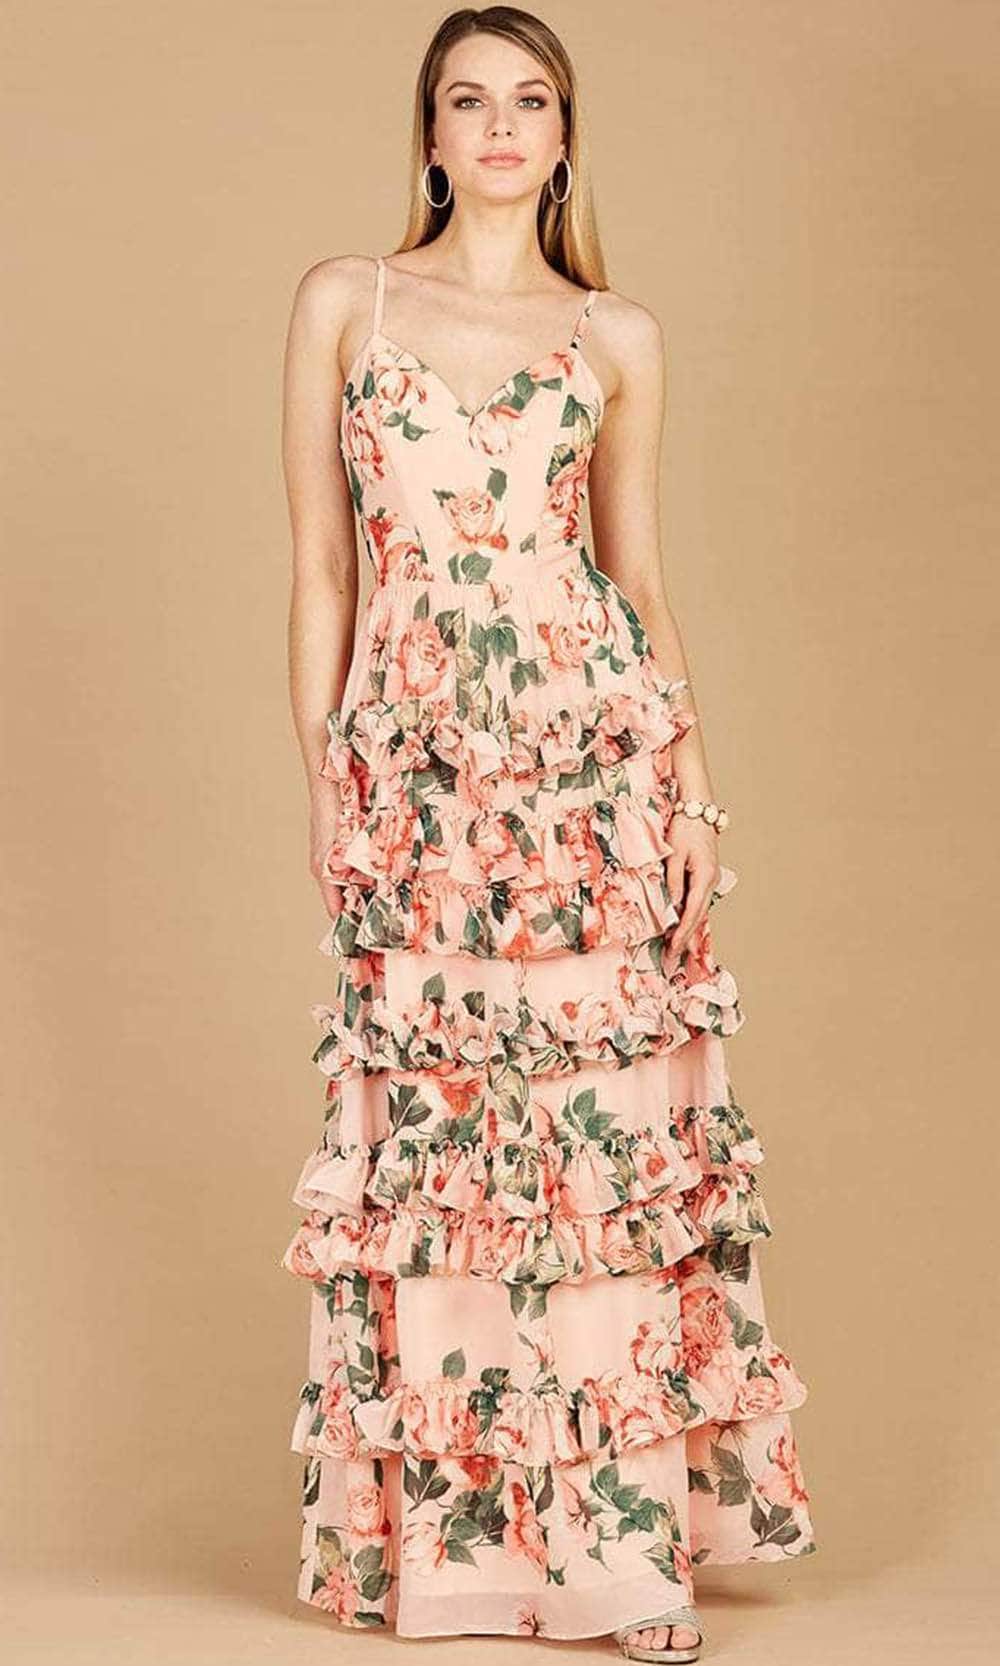 Lara Dresses 29242 - Sweetheart Floral Printed Dress Special Occasion Dress